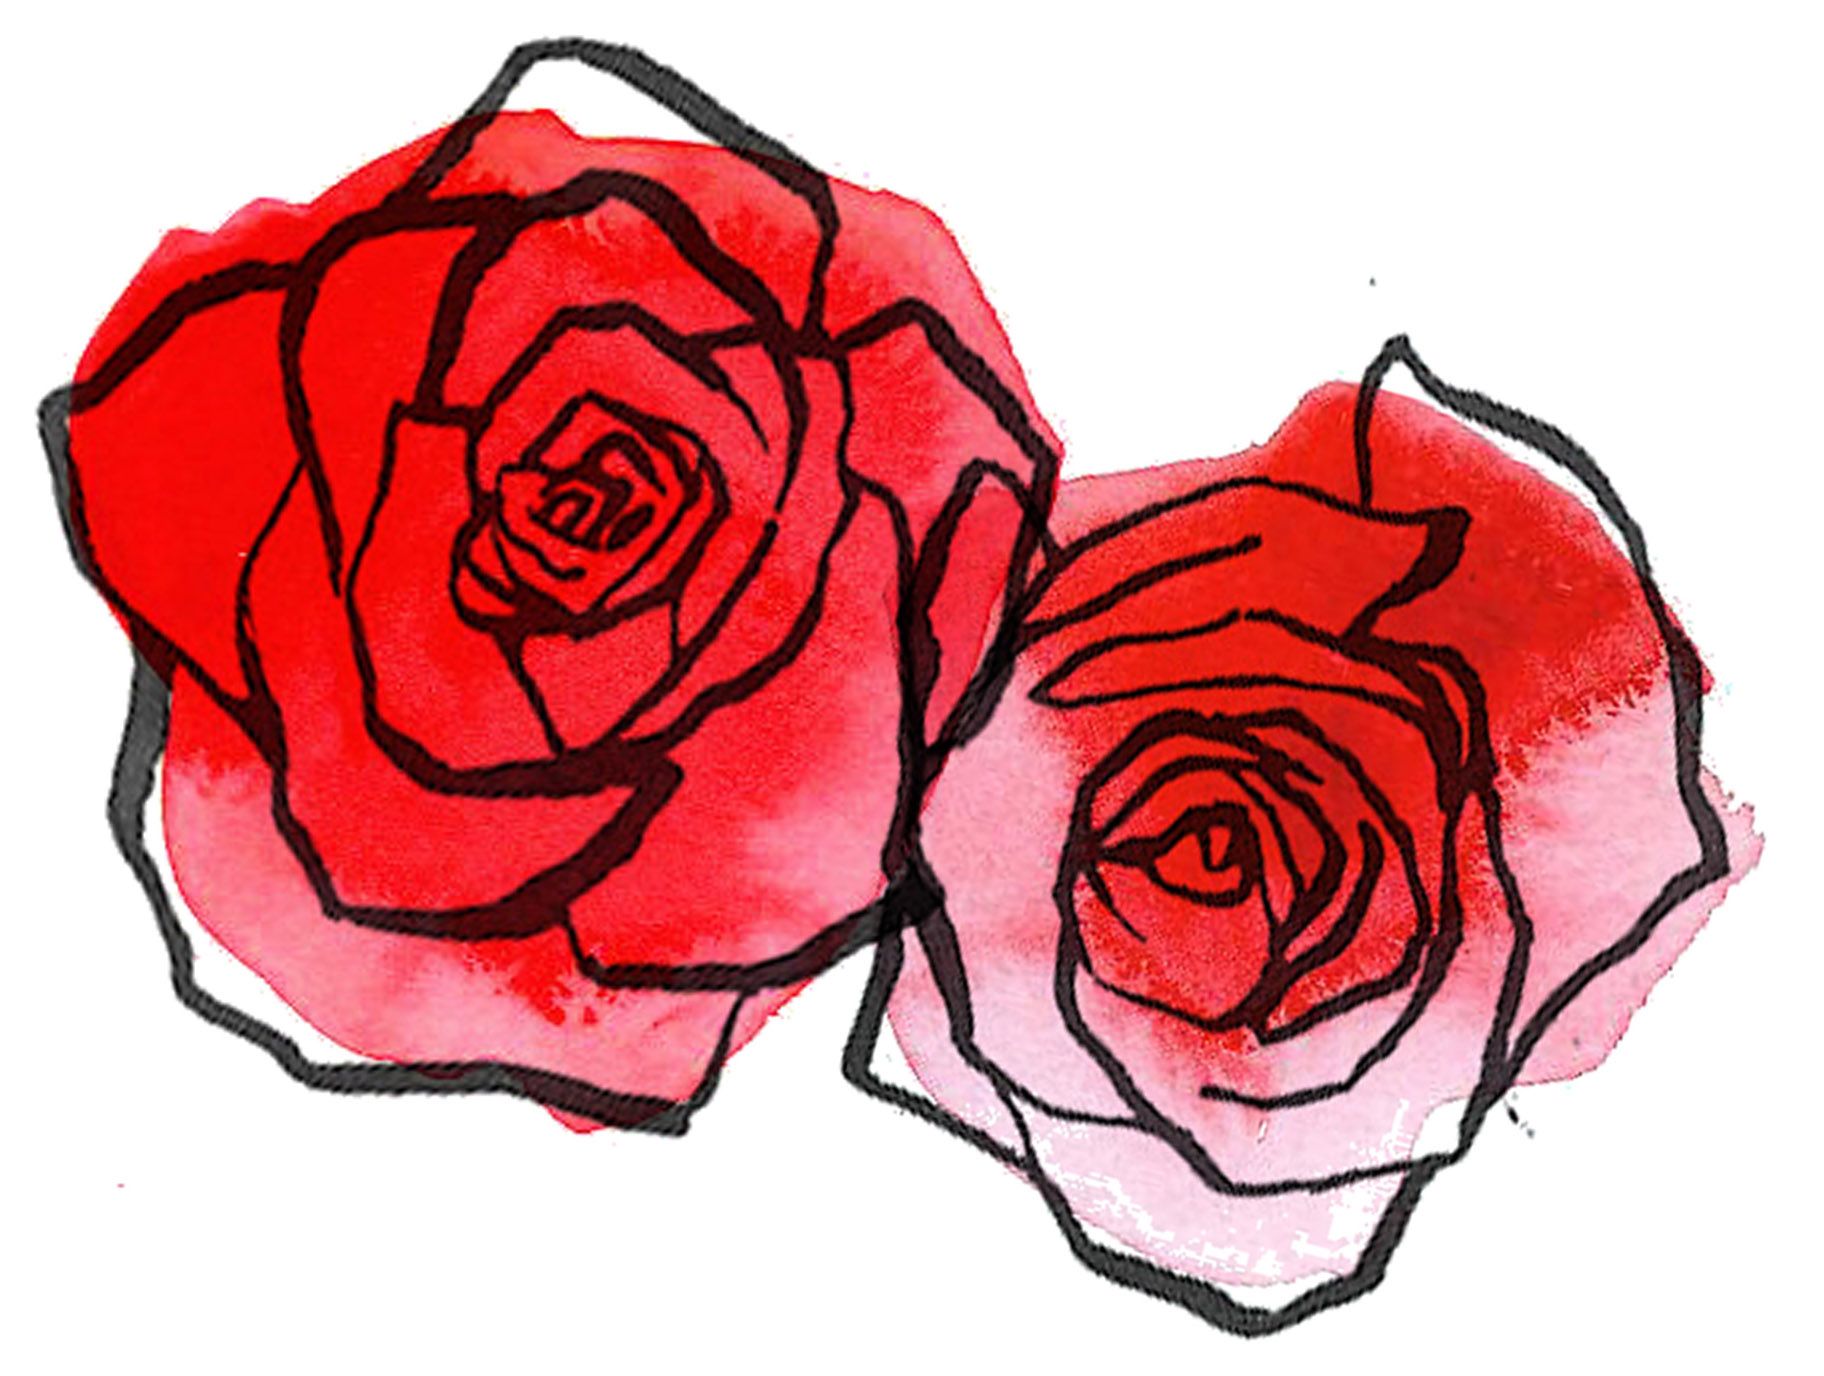 Red Flowers Drawing at GetDrawings.com | Free for personal use Red ...